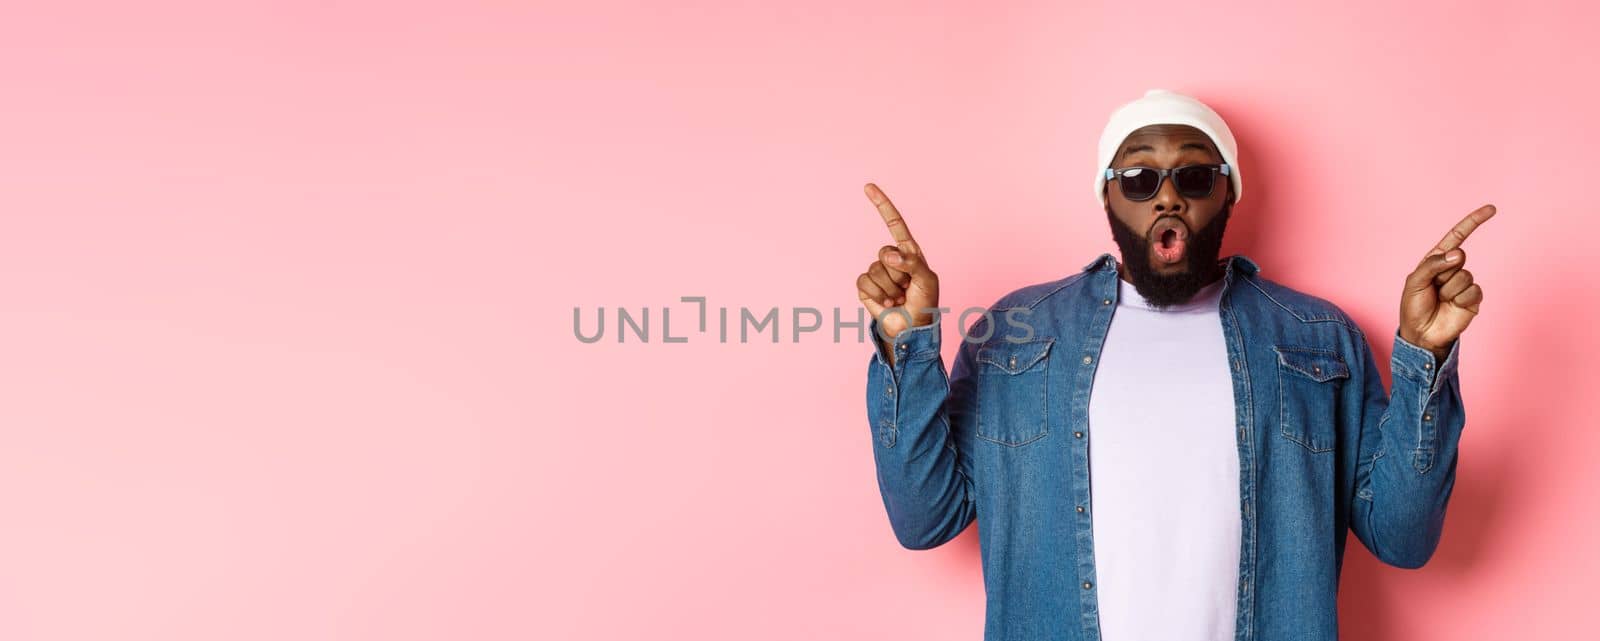 Amazed cool Black guy showing two variants, pointing fingers sideways and staring at camera impressed, wearing sunglasses, standing over pink background.